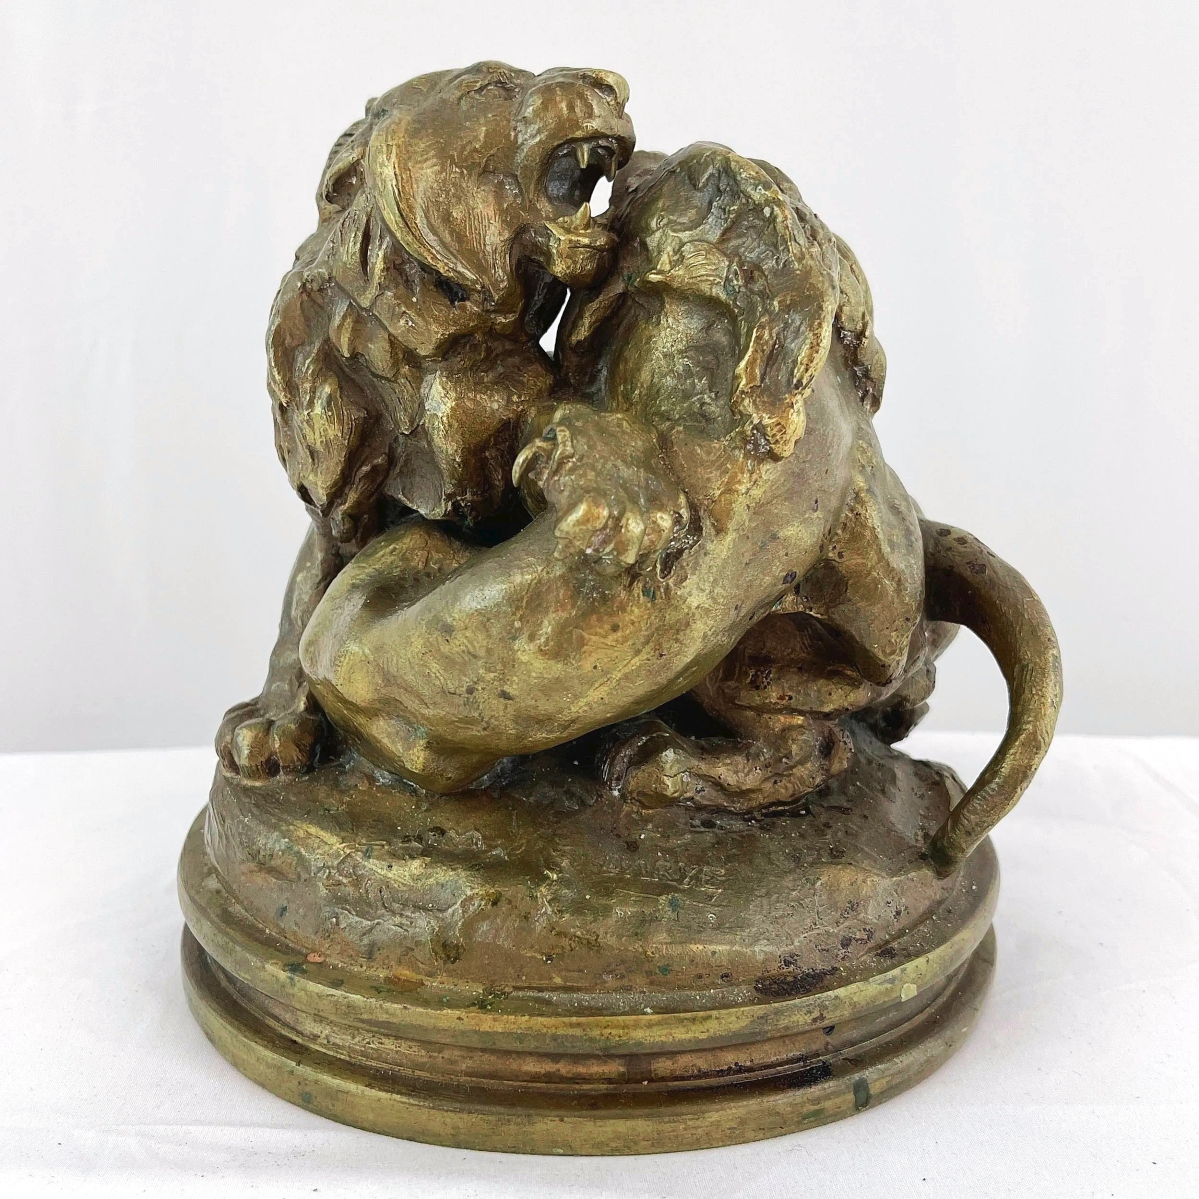 Rising well above its $400 high estimate to bring $5,400 was Antoine Barye’s bronze, “Deux Jeunes Lions,” depicting lions in combat. It measured 8 inches tall. The Brooklyn Museum has an example in its collection.